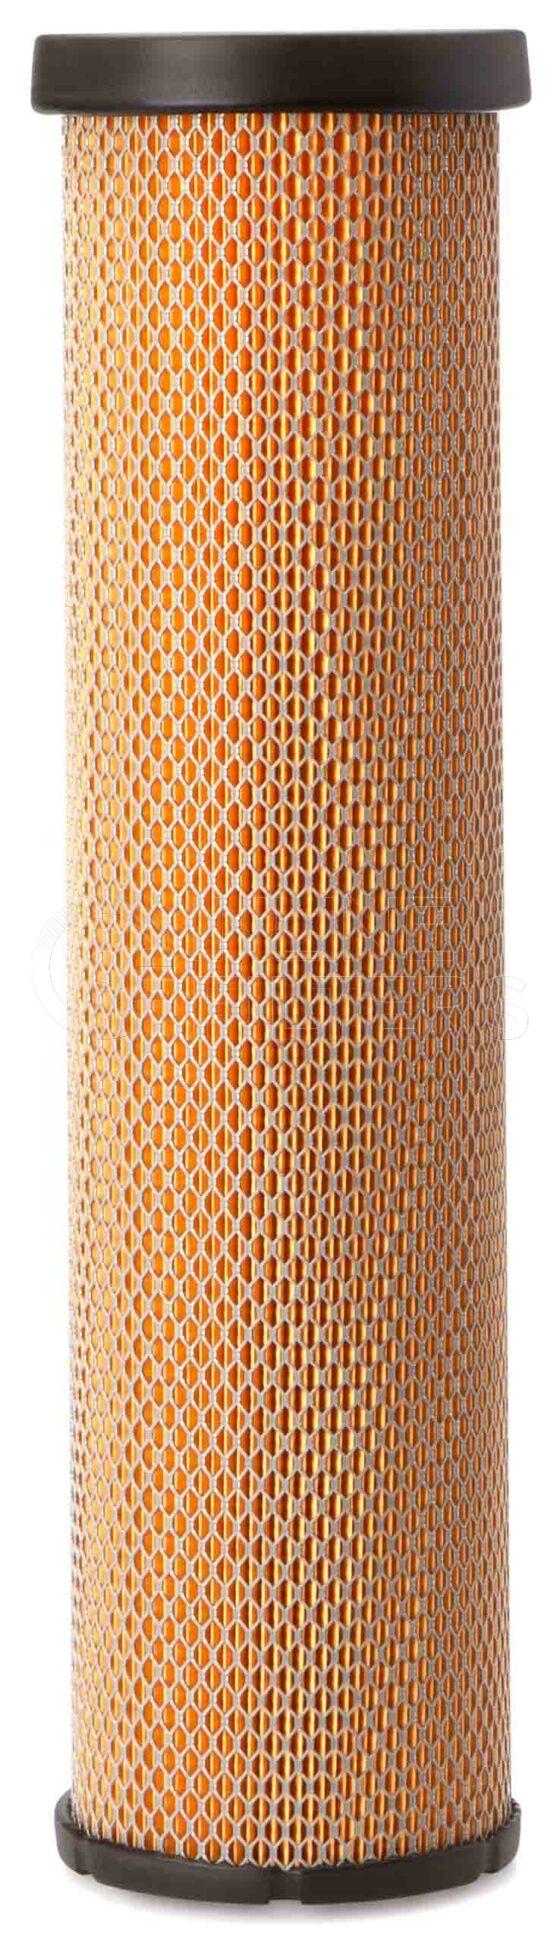 Fleetguard AF26215. Air Filter Product – Brand Specific Fleetguard – Flame Retardant Product Fleetguard filter product Air Filter. Main Cross Reference is New Holland 84072430. Flame Retardant Media: No. Flow Direction: Outside In. Fleetguard Part Type: AFSECMAG